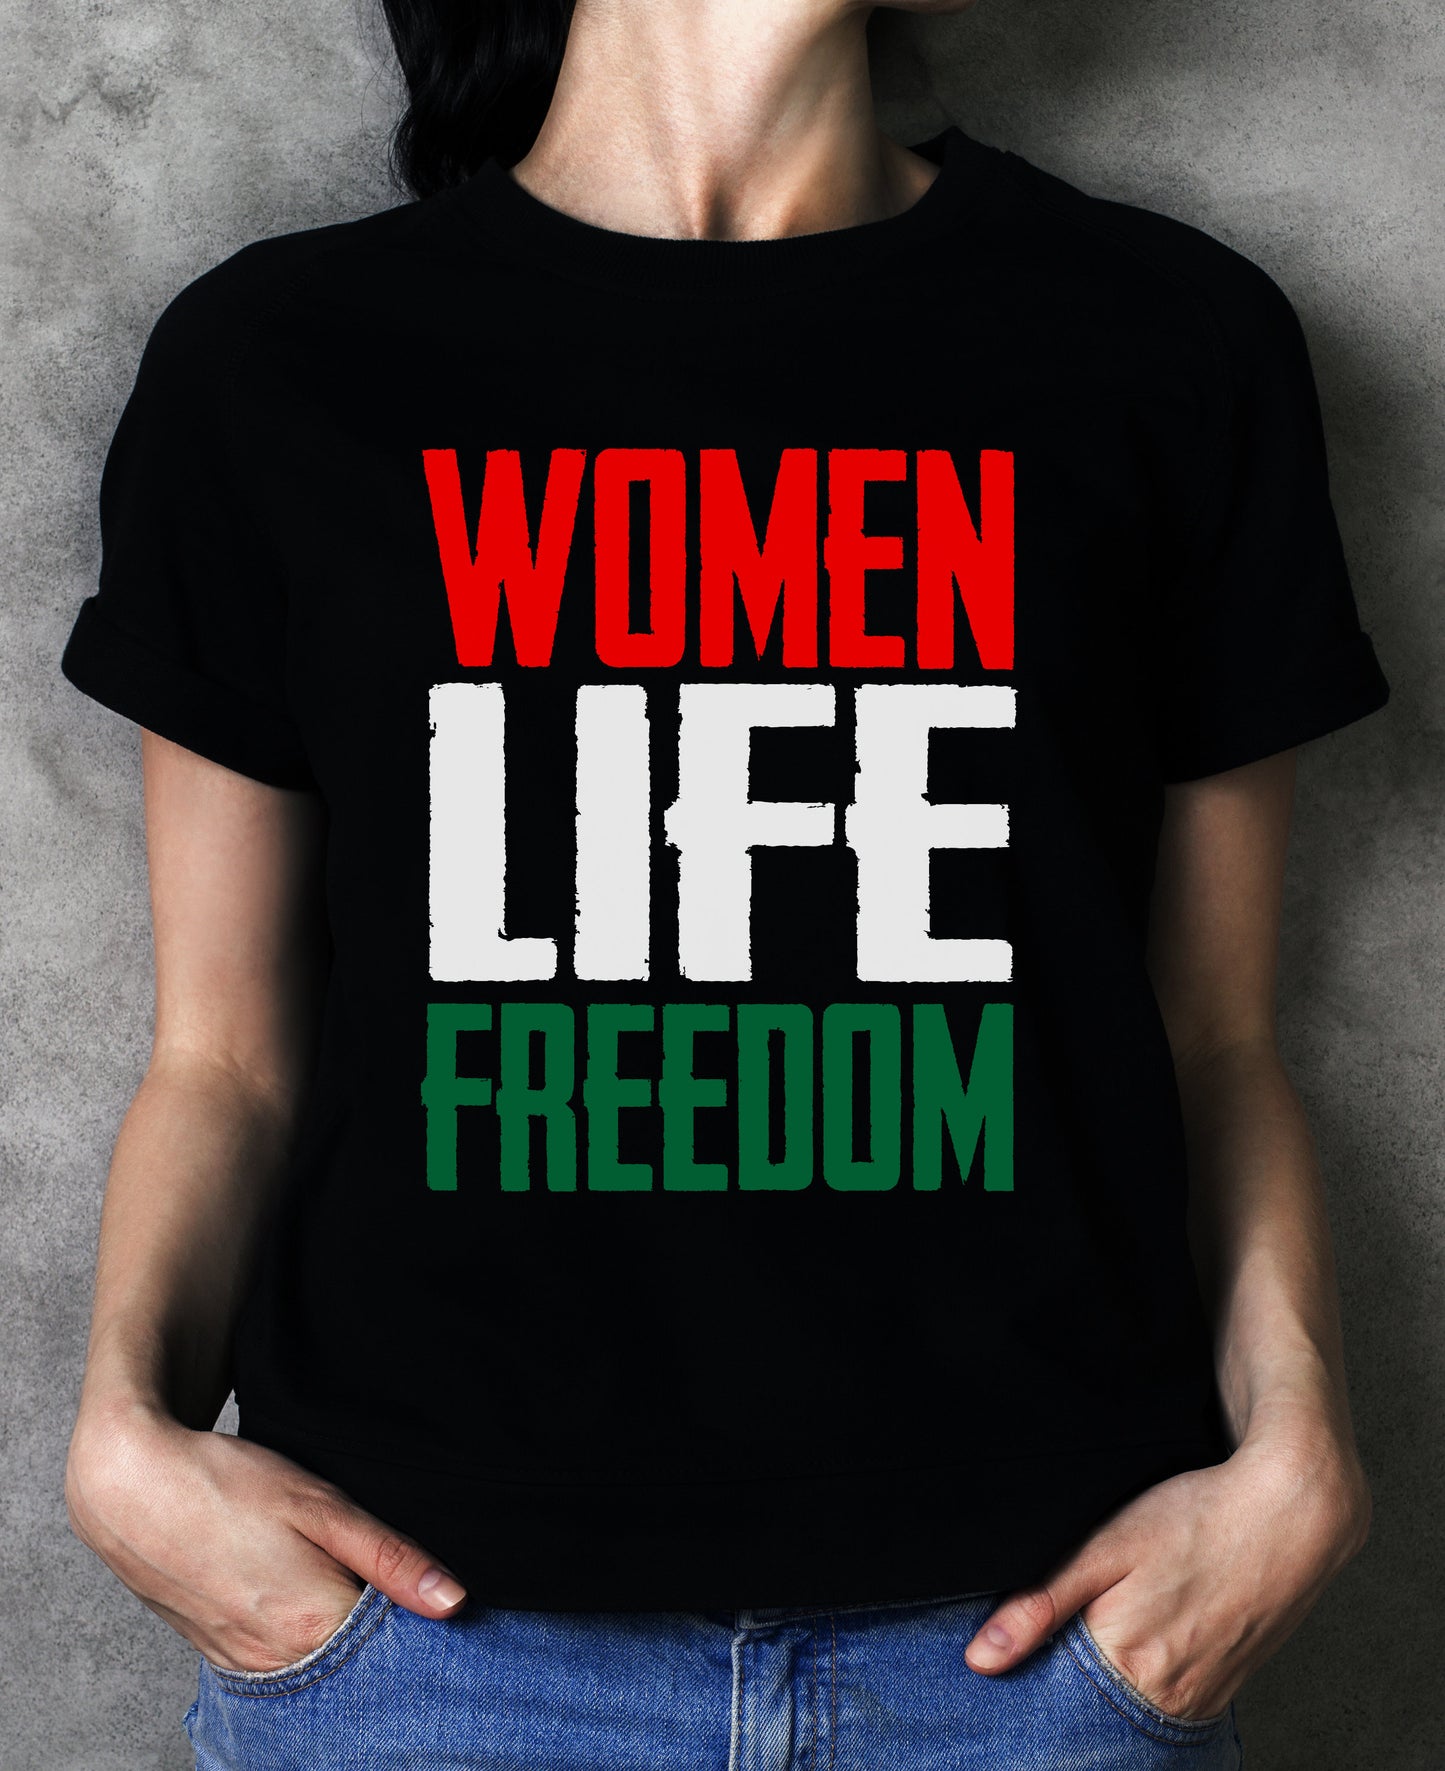 Women Life Freedom Tshirt | Iranian Protest Tshirt for Women's Rights in Iran